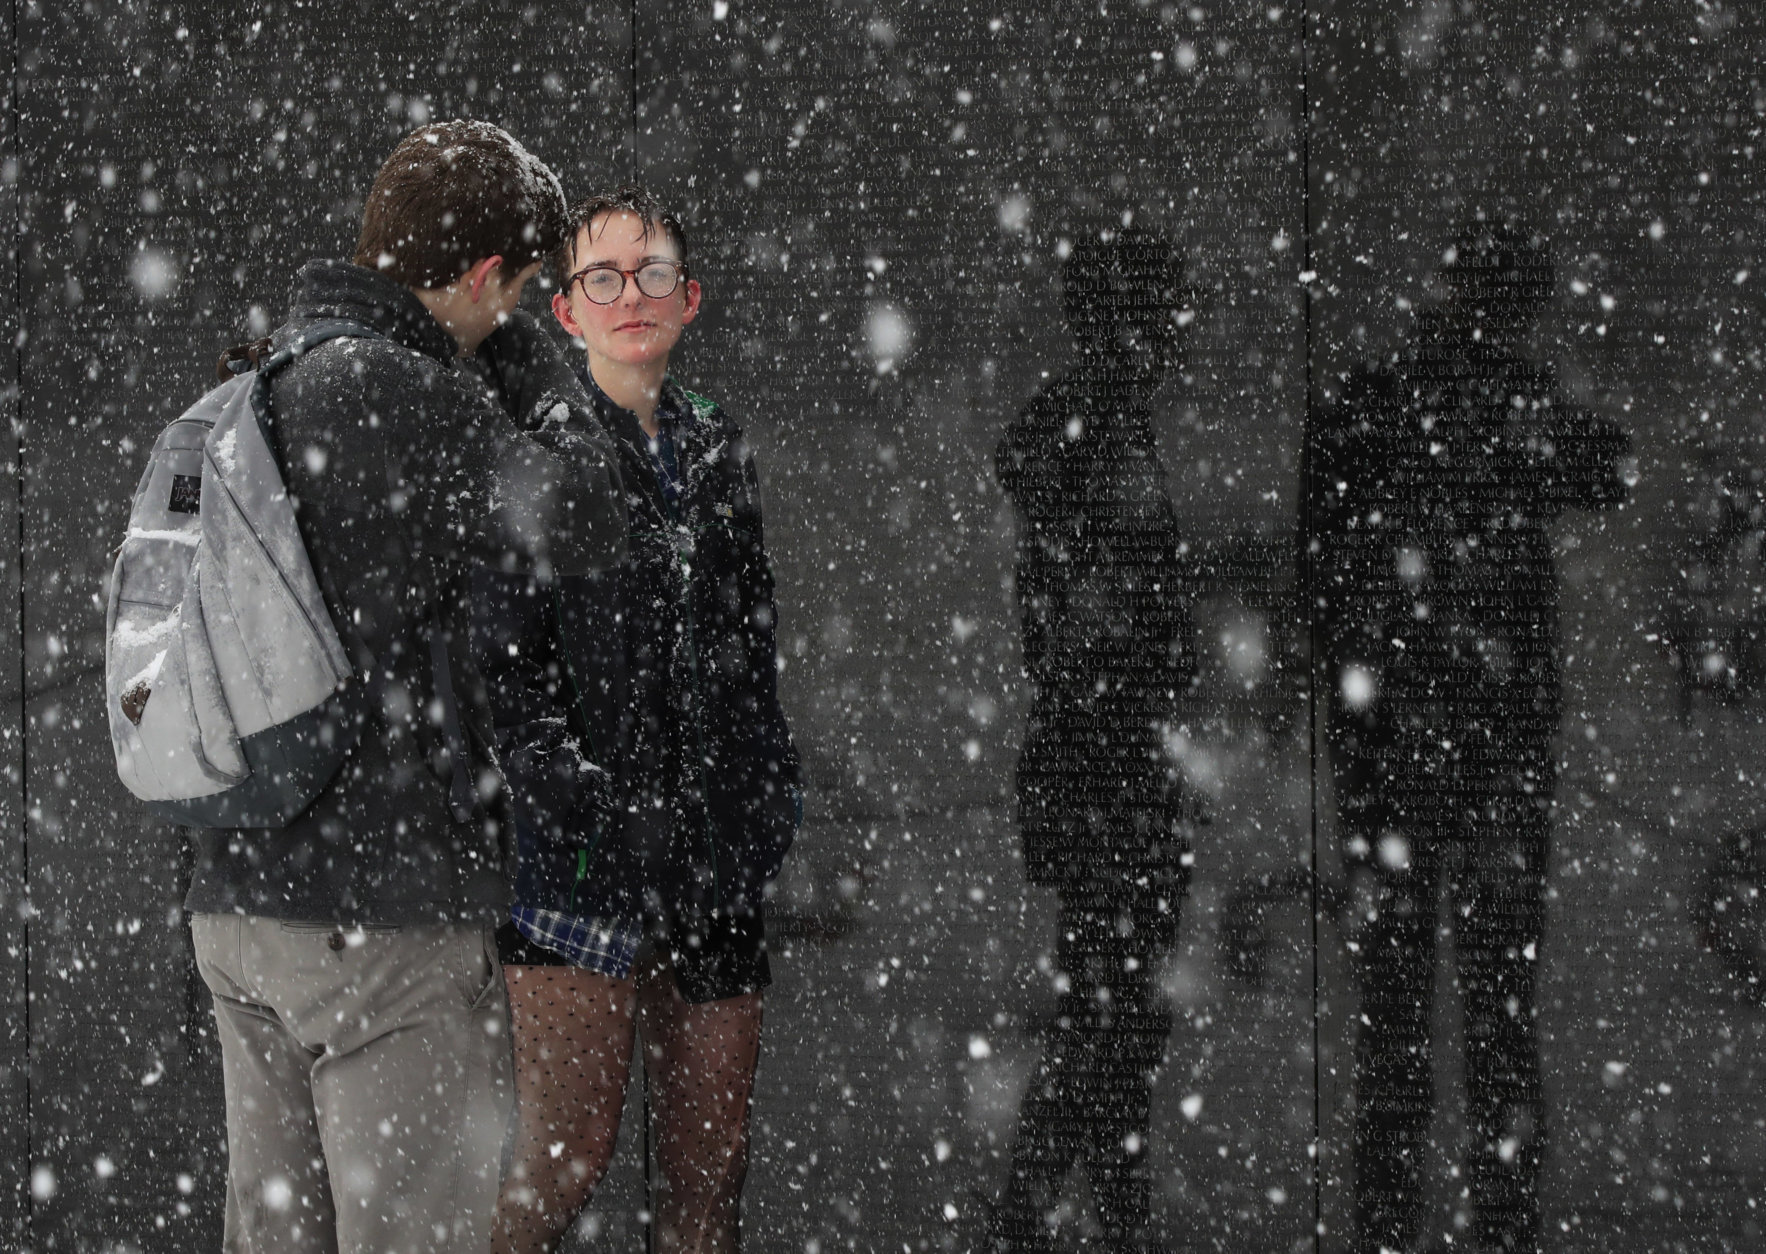 Washington visitor Haley Rich and Eric Merritt from Las Vegas, Nev., pause at the Vietnam Veterans Memorial on the National Mall in Washington during a Spring snow storm, Wednesday, March 21, 2018. The coming spring nor'easter caused the federal government to close its offices in the Washington area. (AP Photo/Manuel Balce Ceneta)